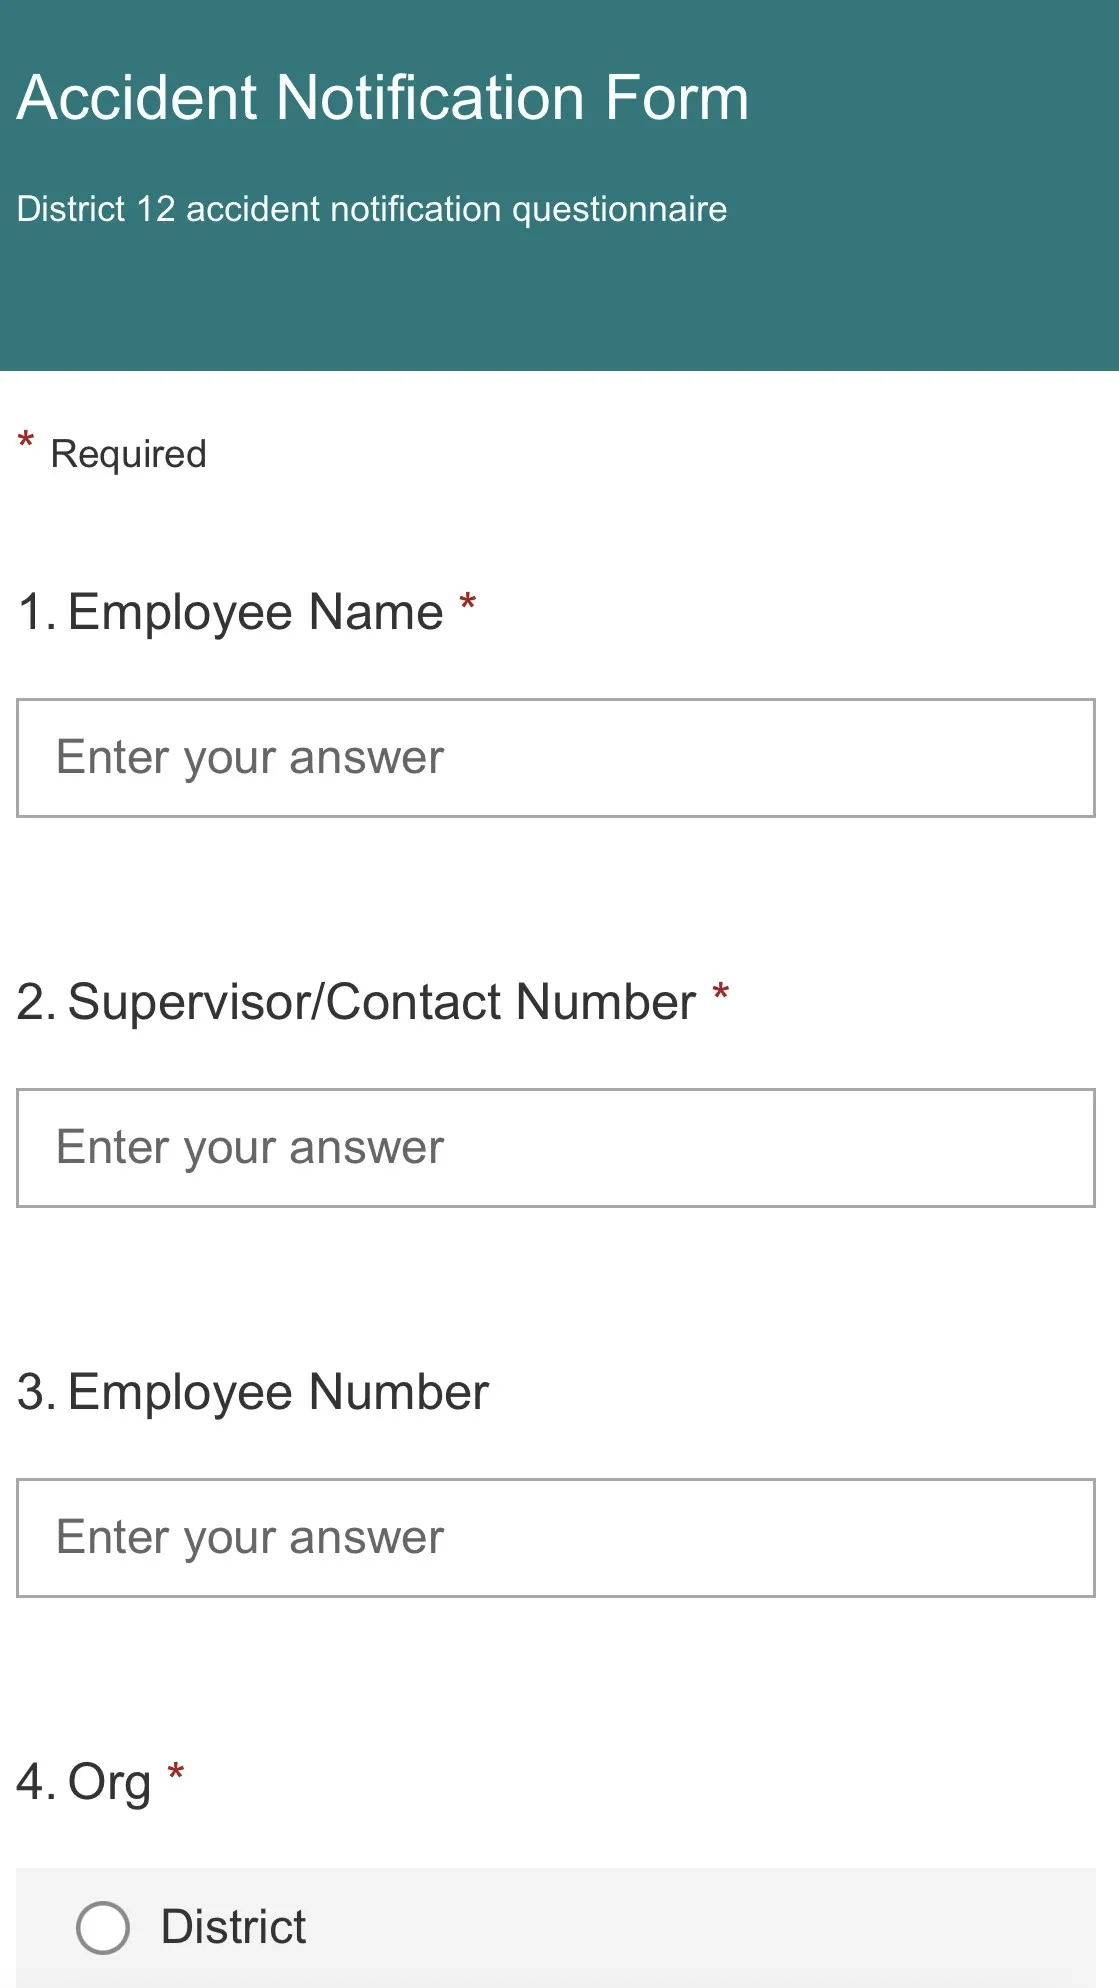 A screenshot of the Microsoft Form that shows the Accident Notification Form, with required fields of information to be completed.